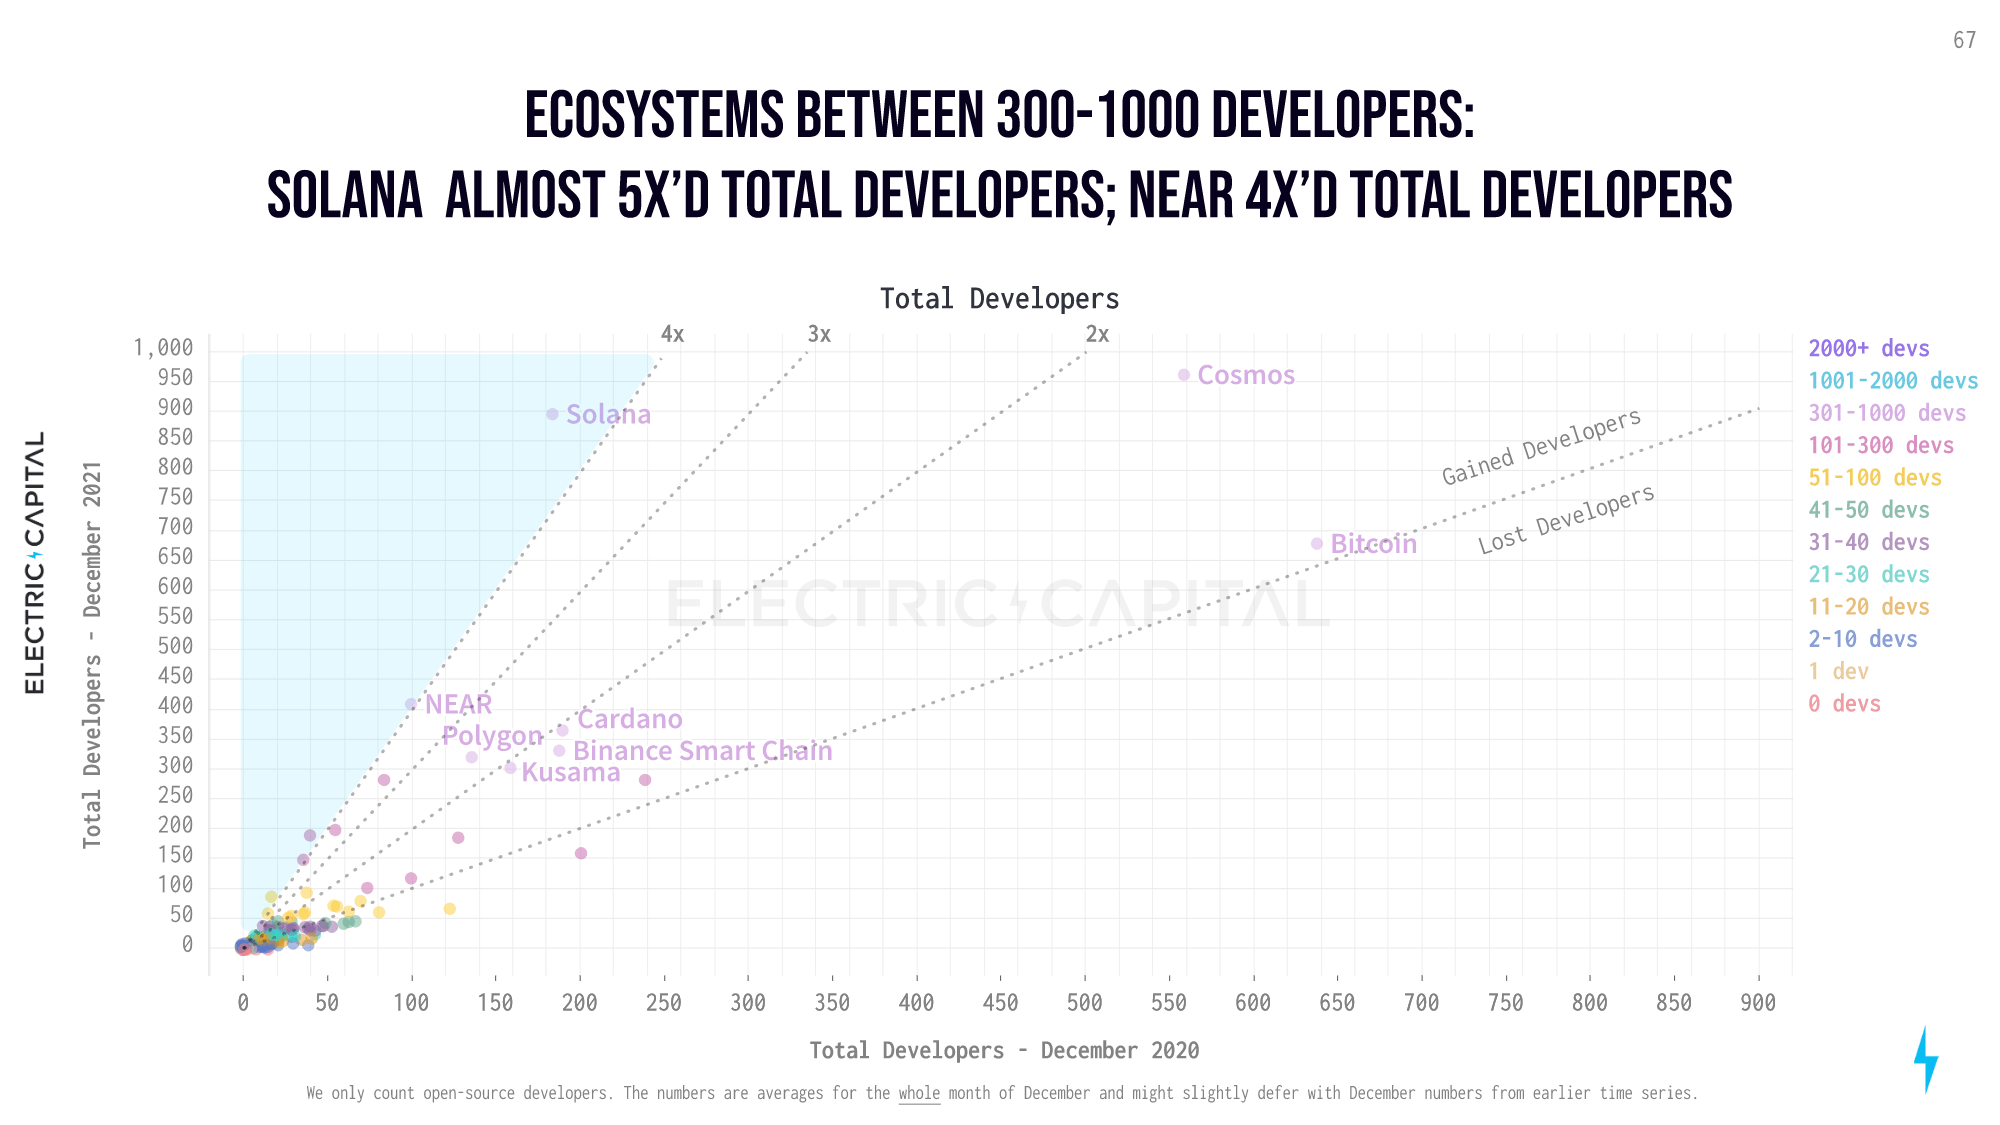 Total developers: Ecosystems between 300 and 1000 developers (Electric Capital)